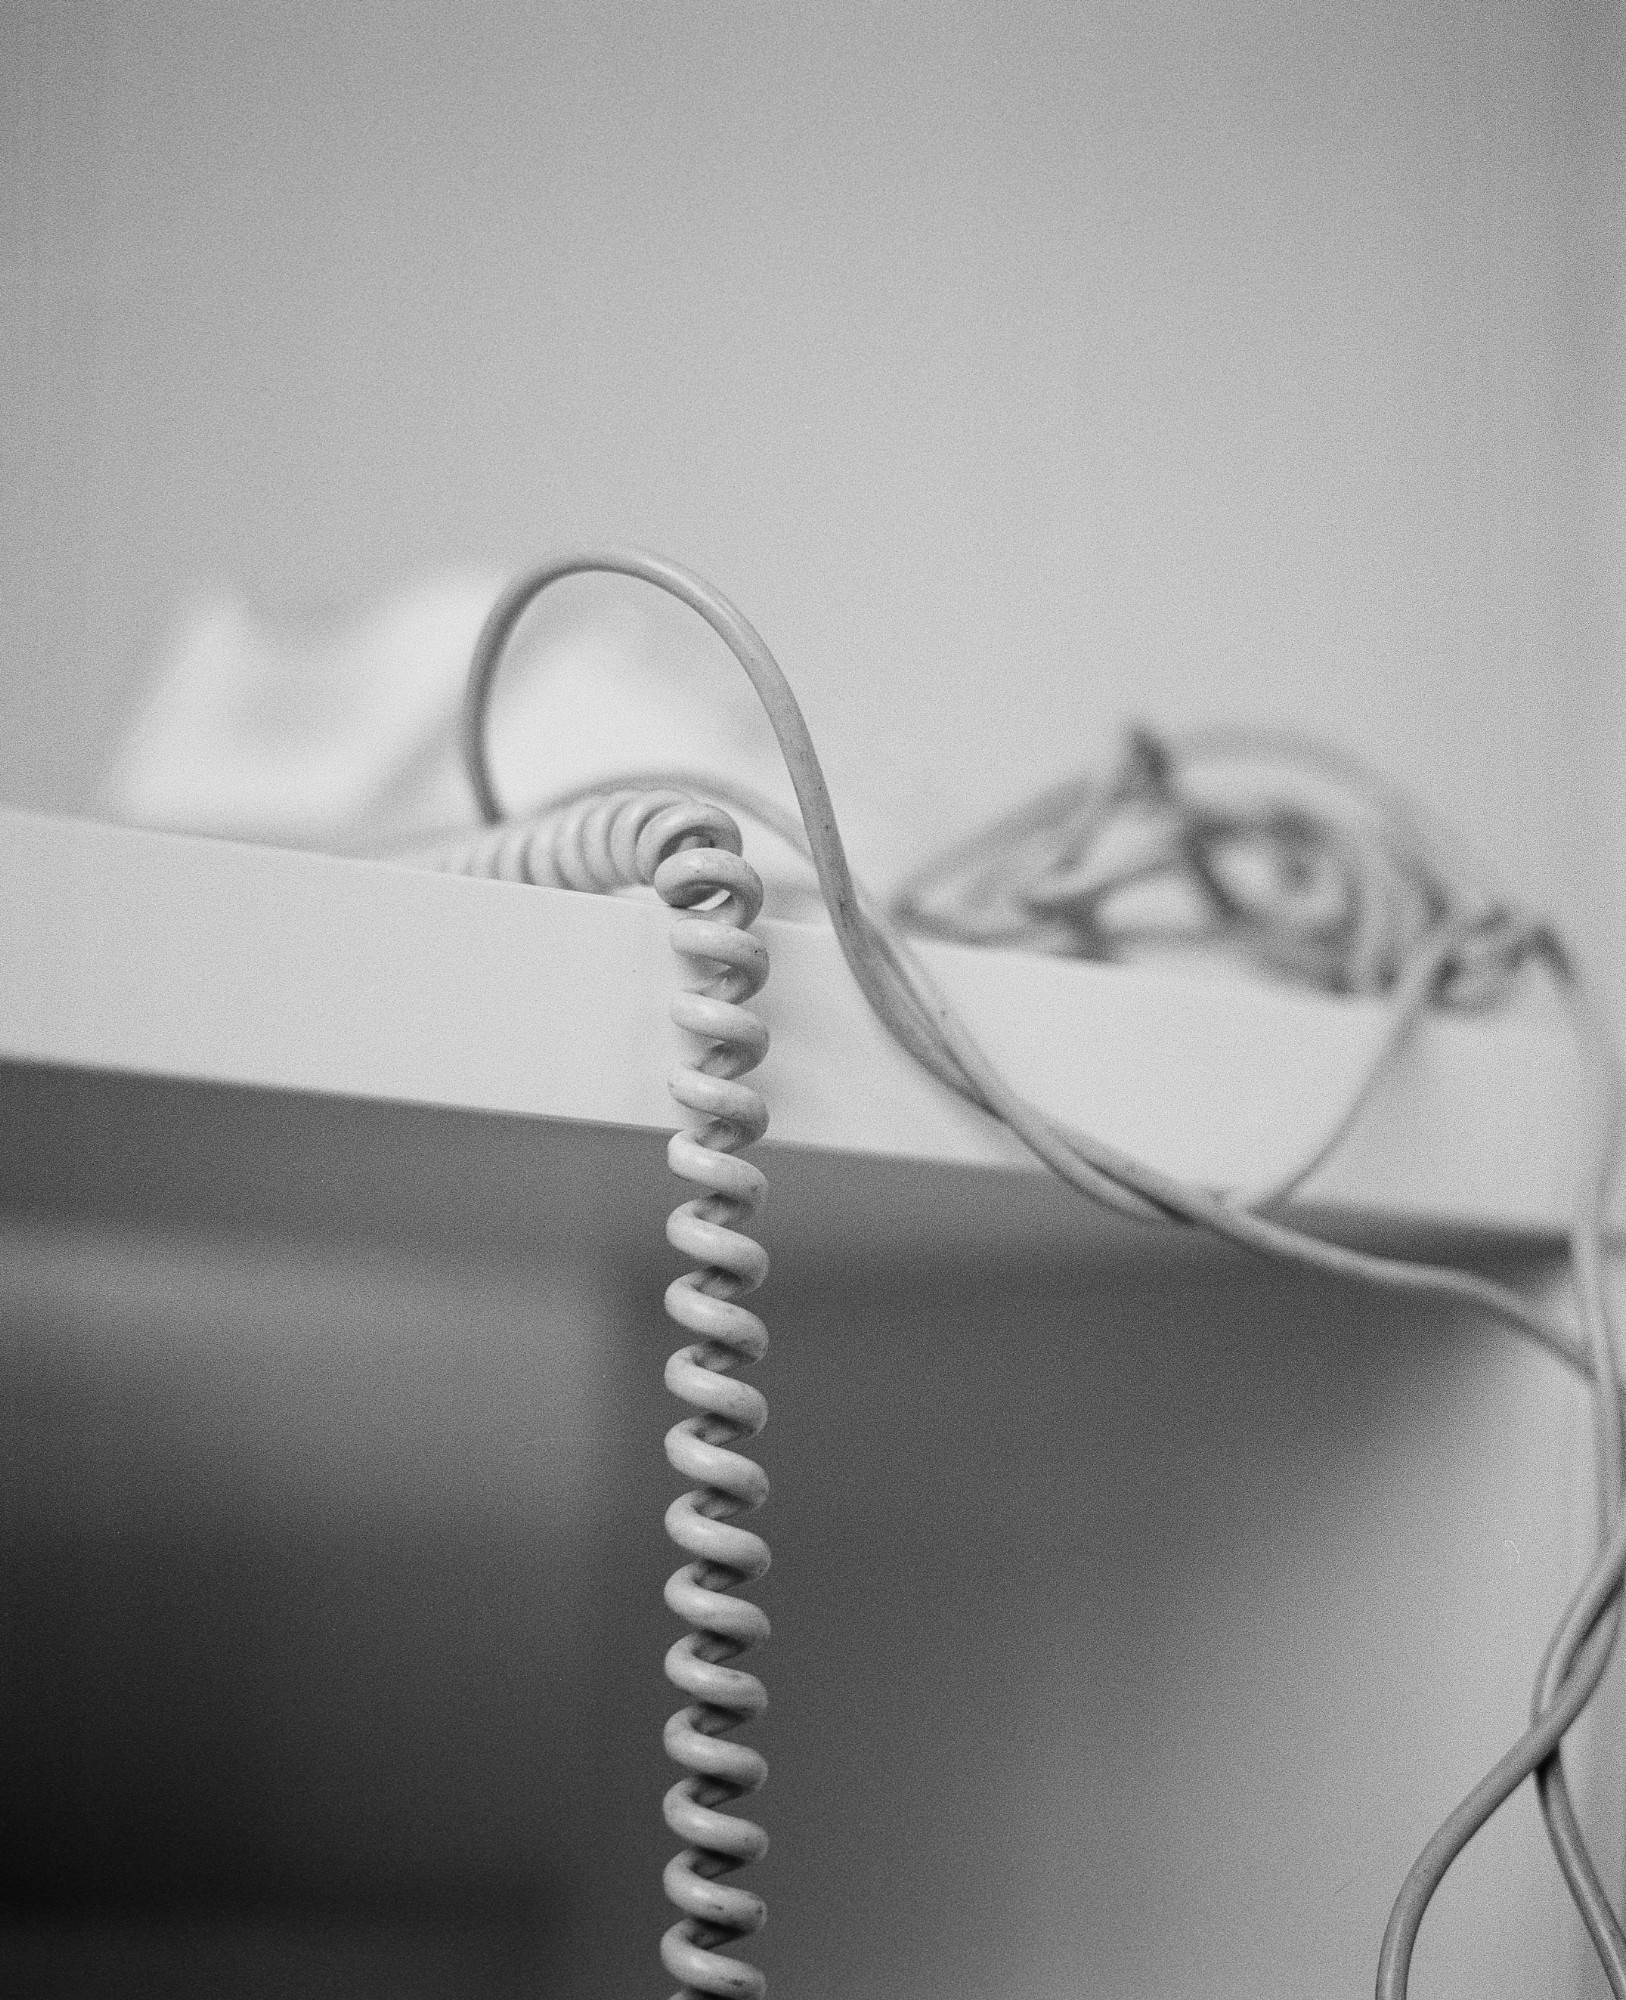 "Telephone wire", Cambridge, 2020 120mm black and white film. Diane-Laure Mussy.